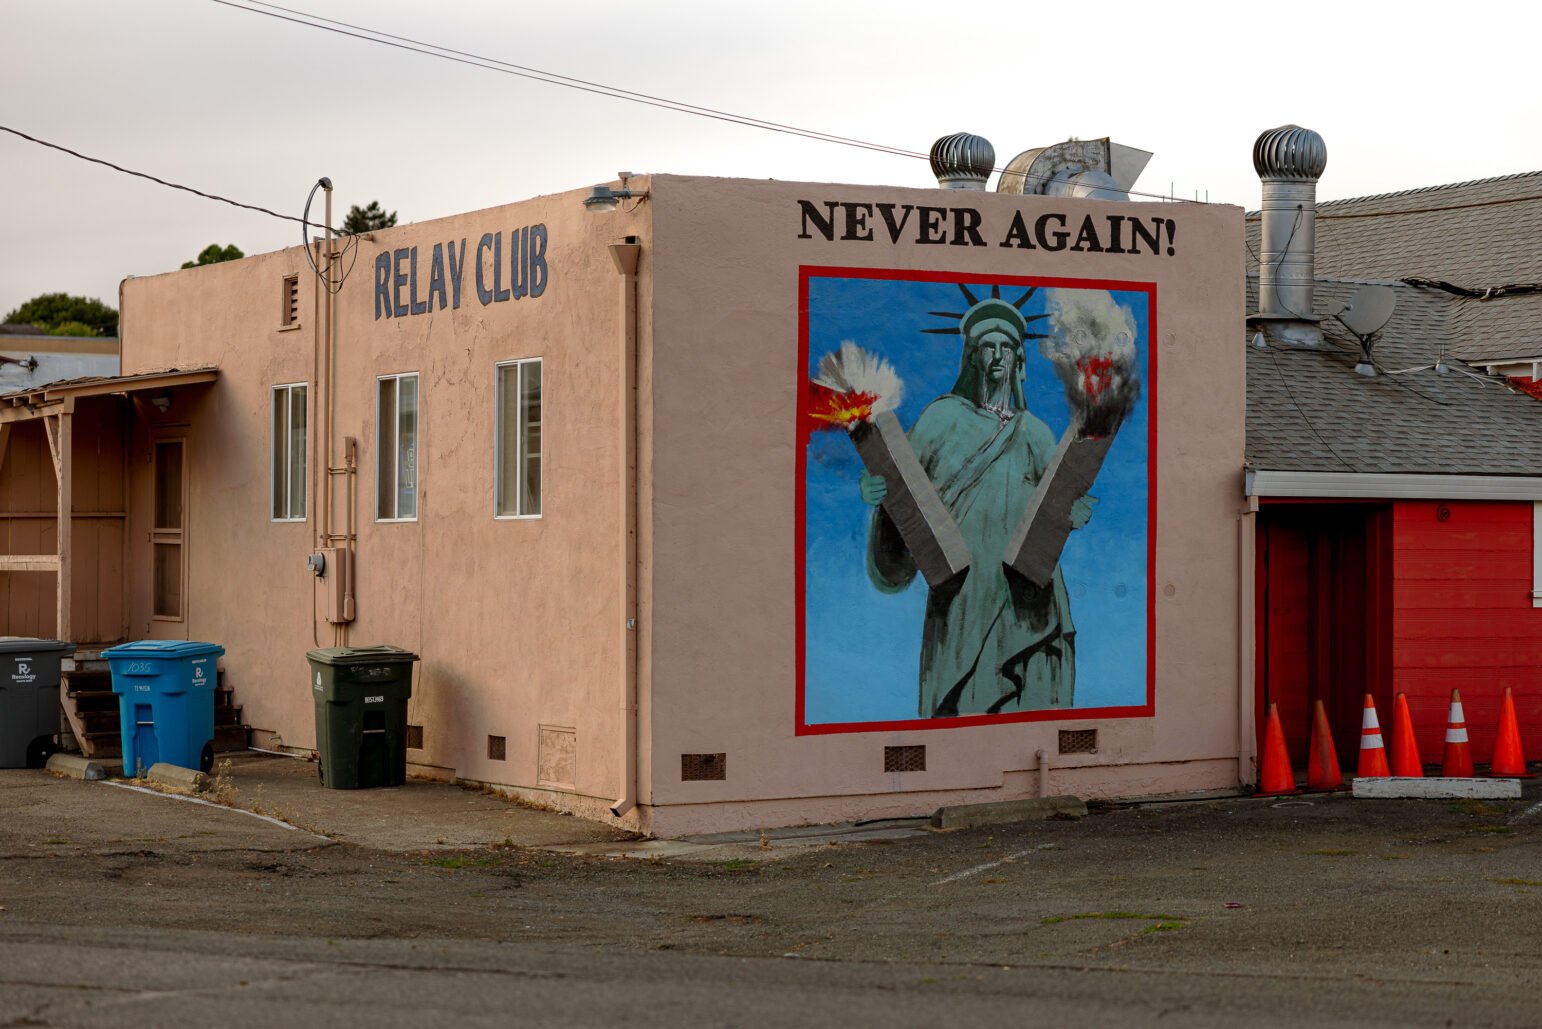 The exterior of a dive bar with the words "Relay Club" on one exterior wall and a mural of the Statue of Liberty holding the twin towers of the World Trade Center on another with the words, "Never Again."